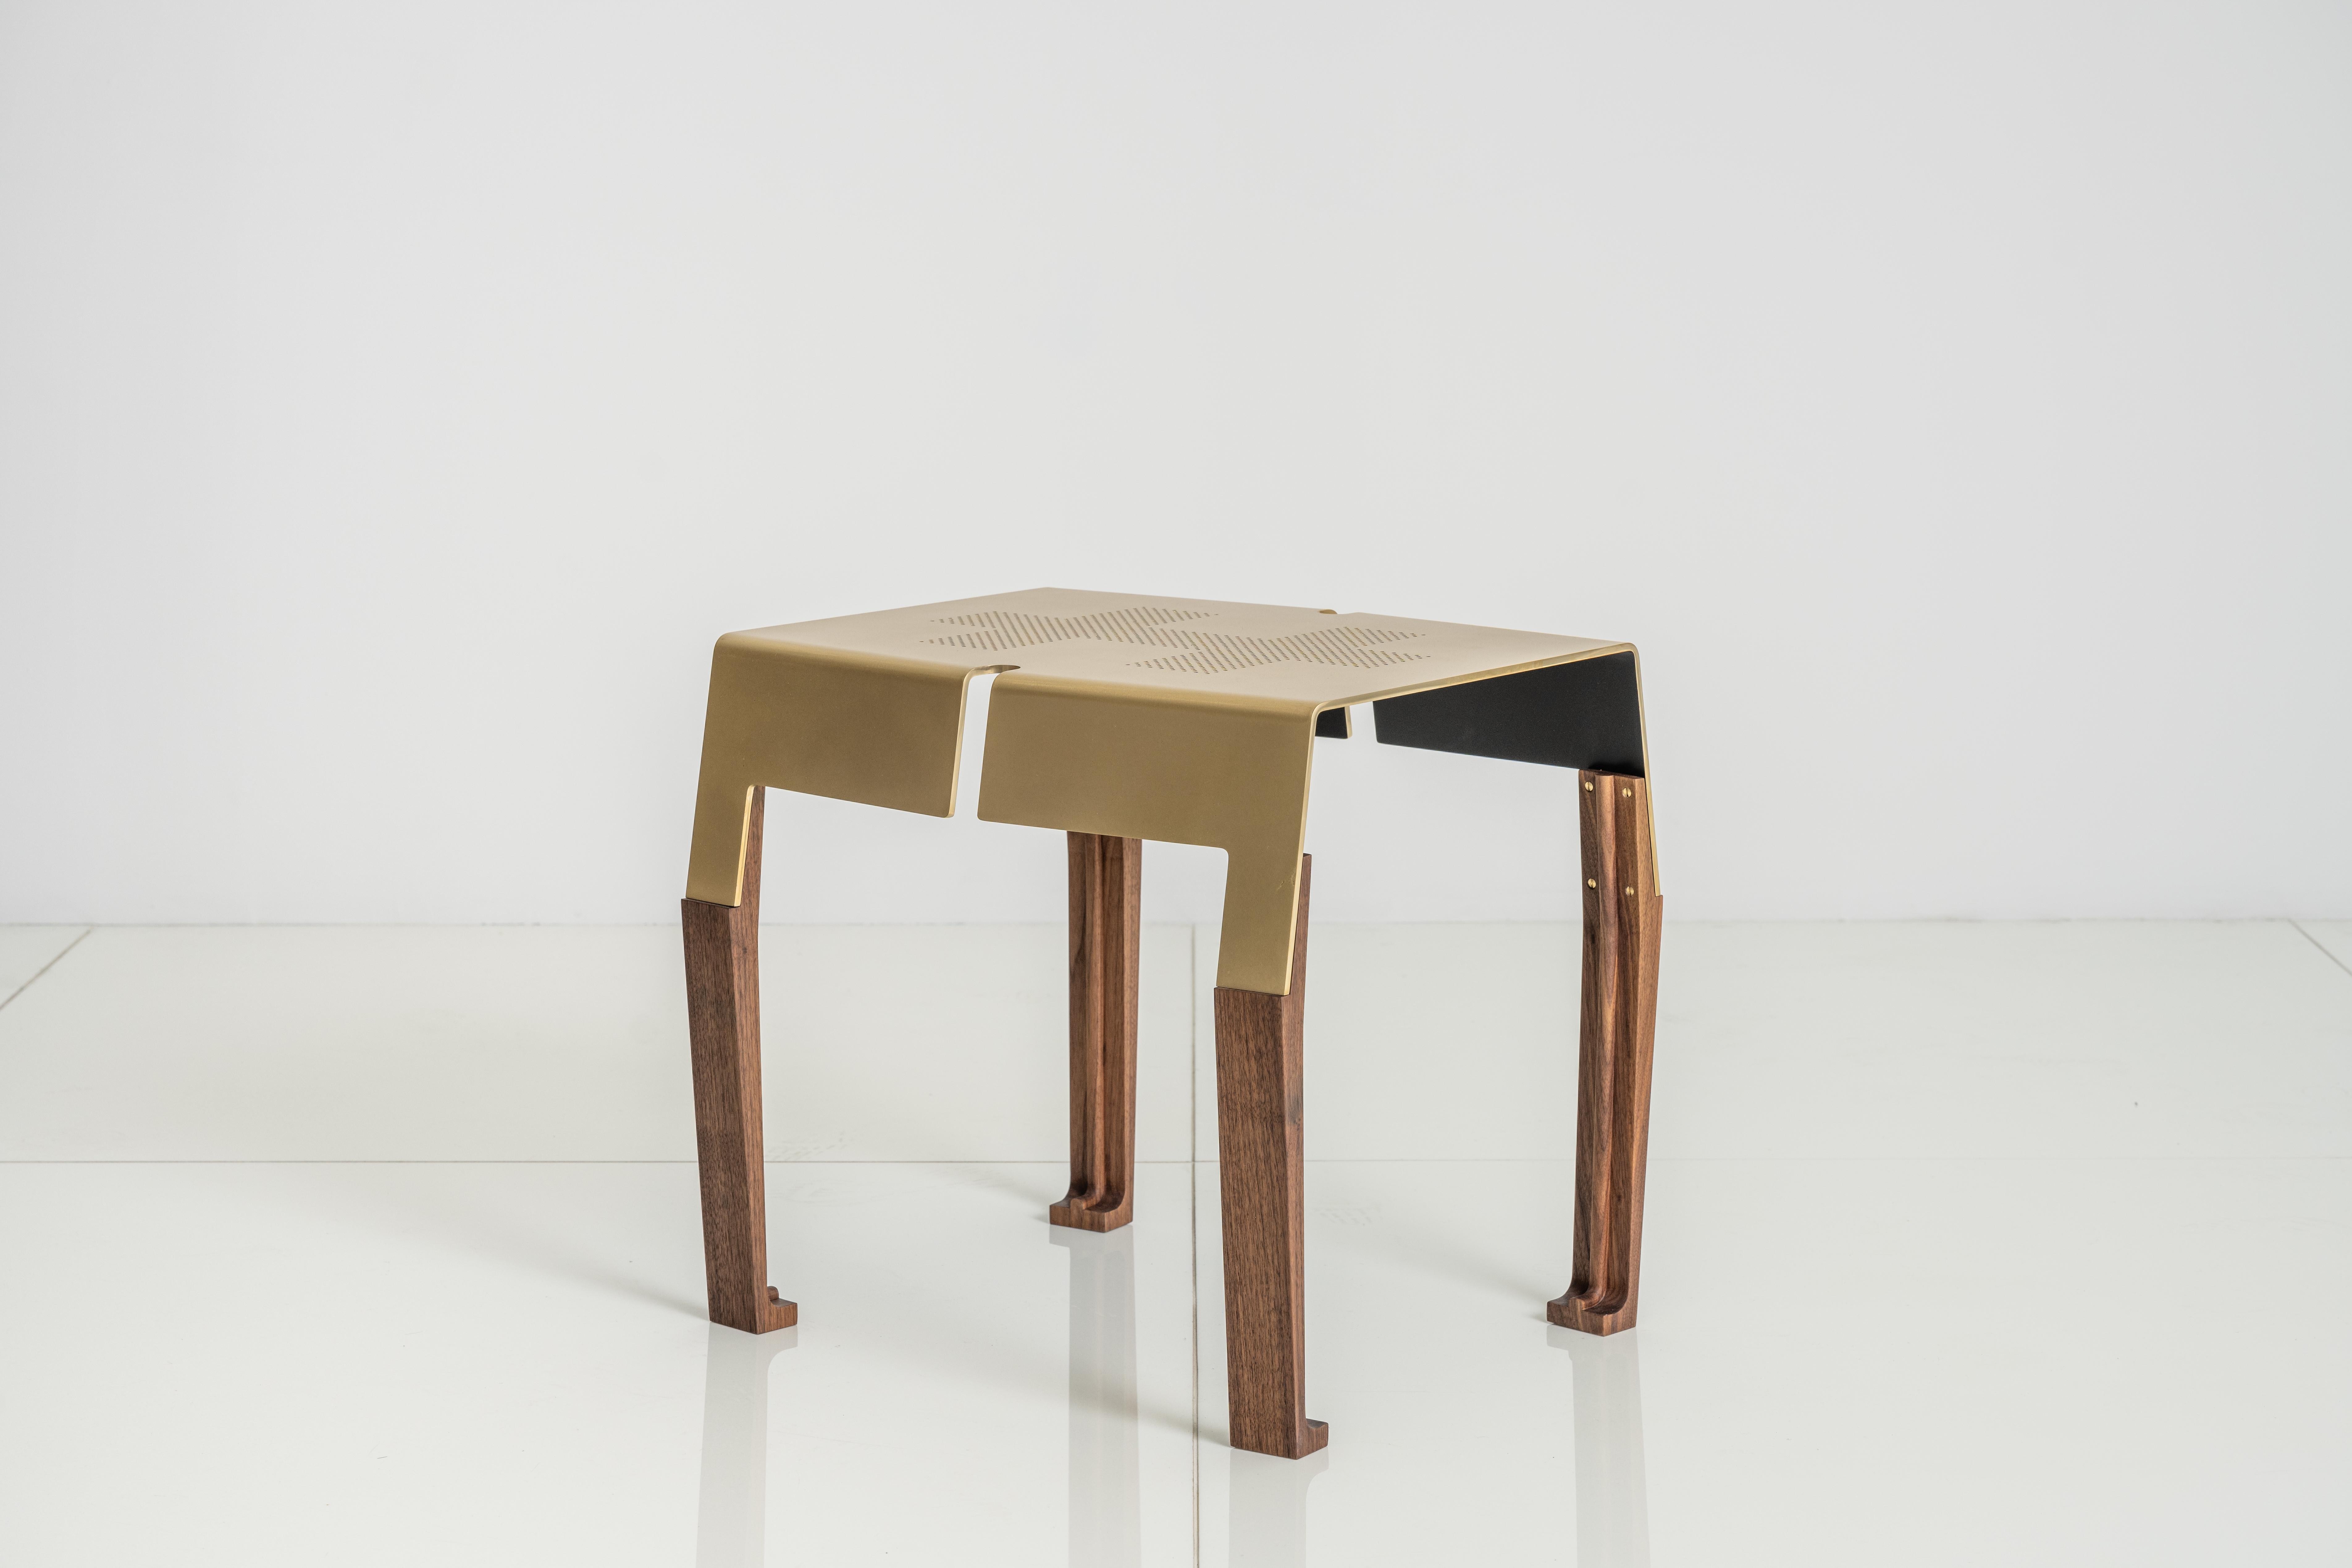 The Tunney 2.0 side table features a solid brass plate top with walnut legs.

This is a natural product that may have slight imperfections. This is the beauty of the product and makes it unique from other items out there on the market.